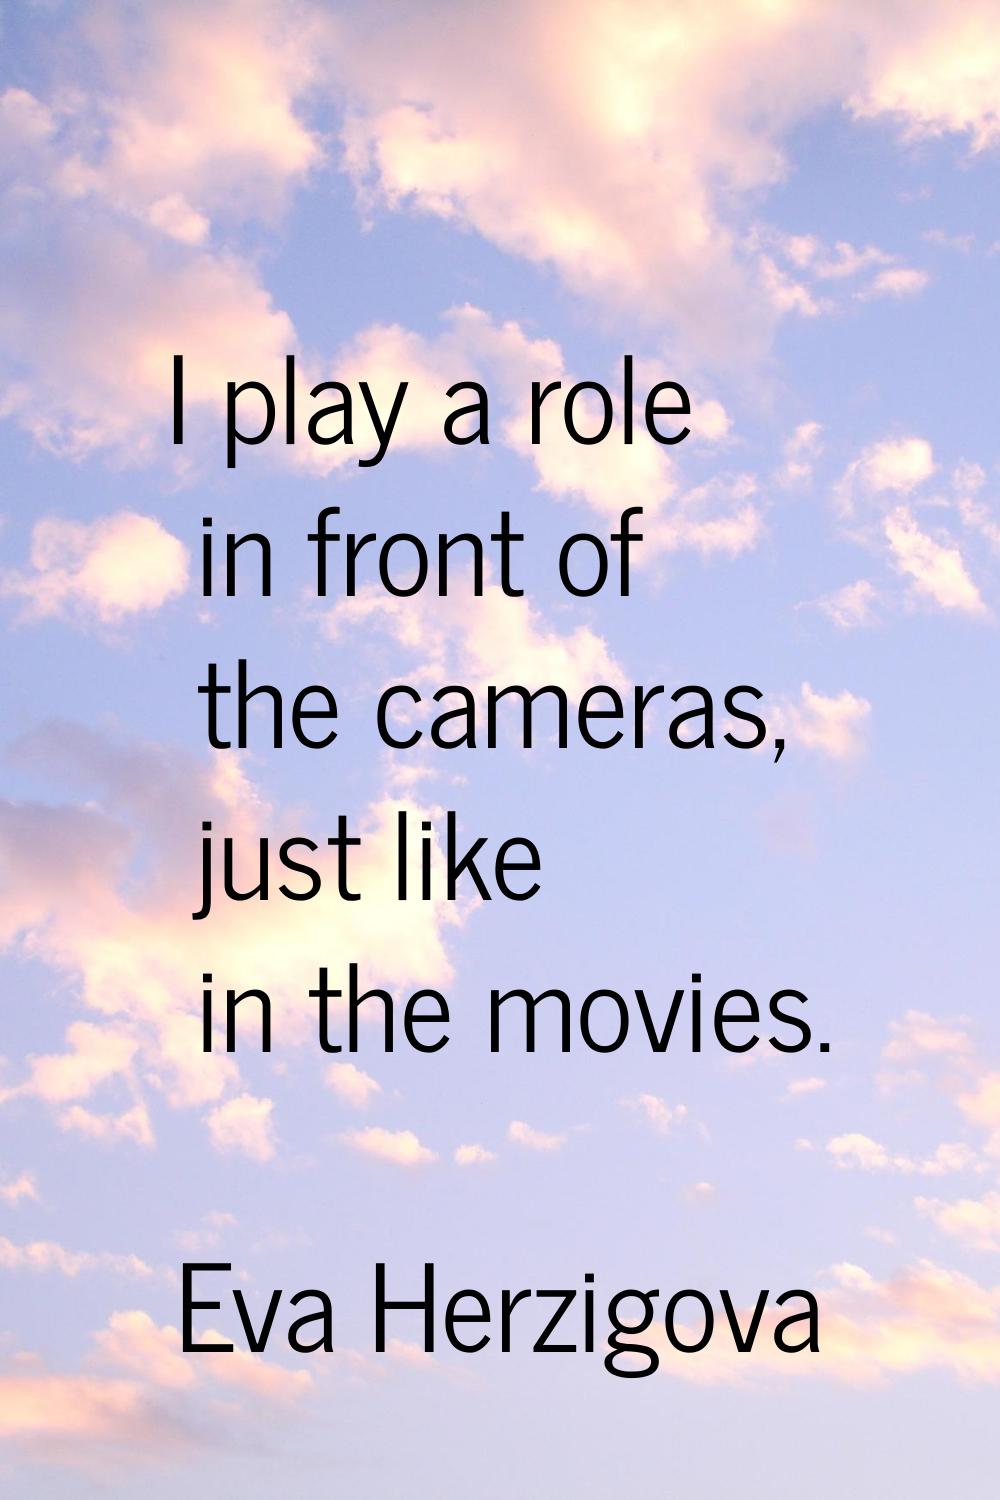 I play a role in front of the cameras, just like in the movies.